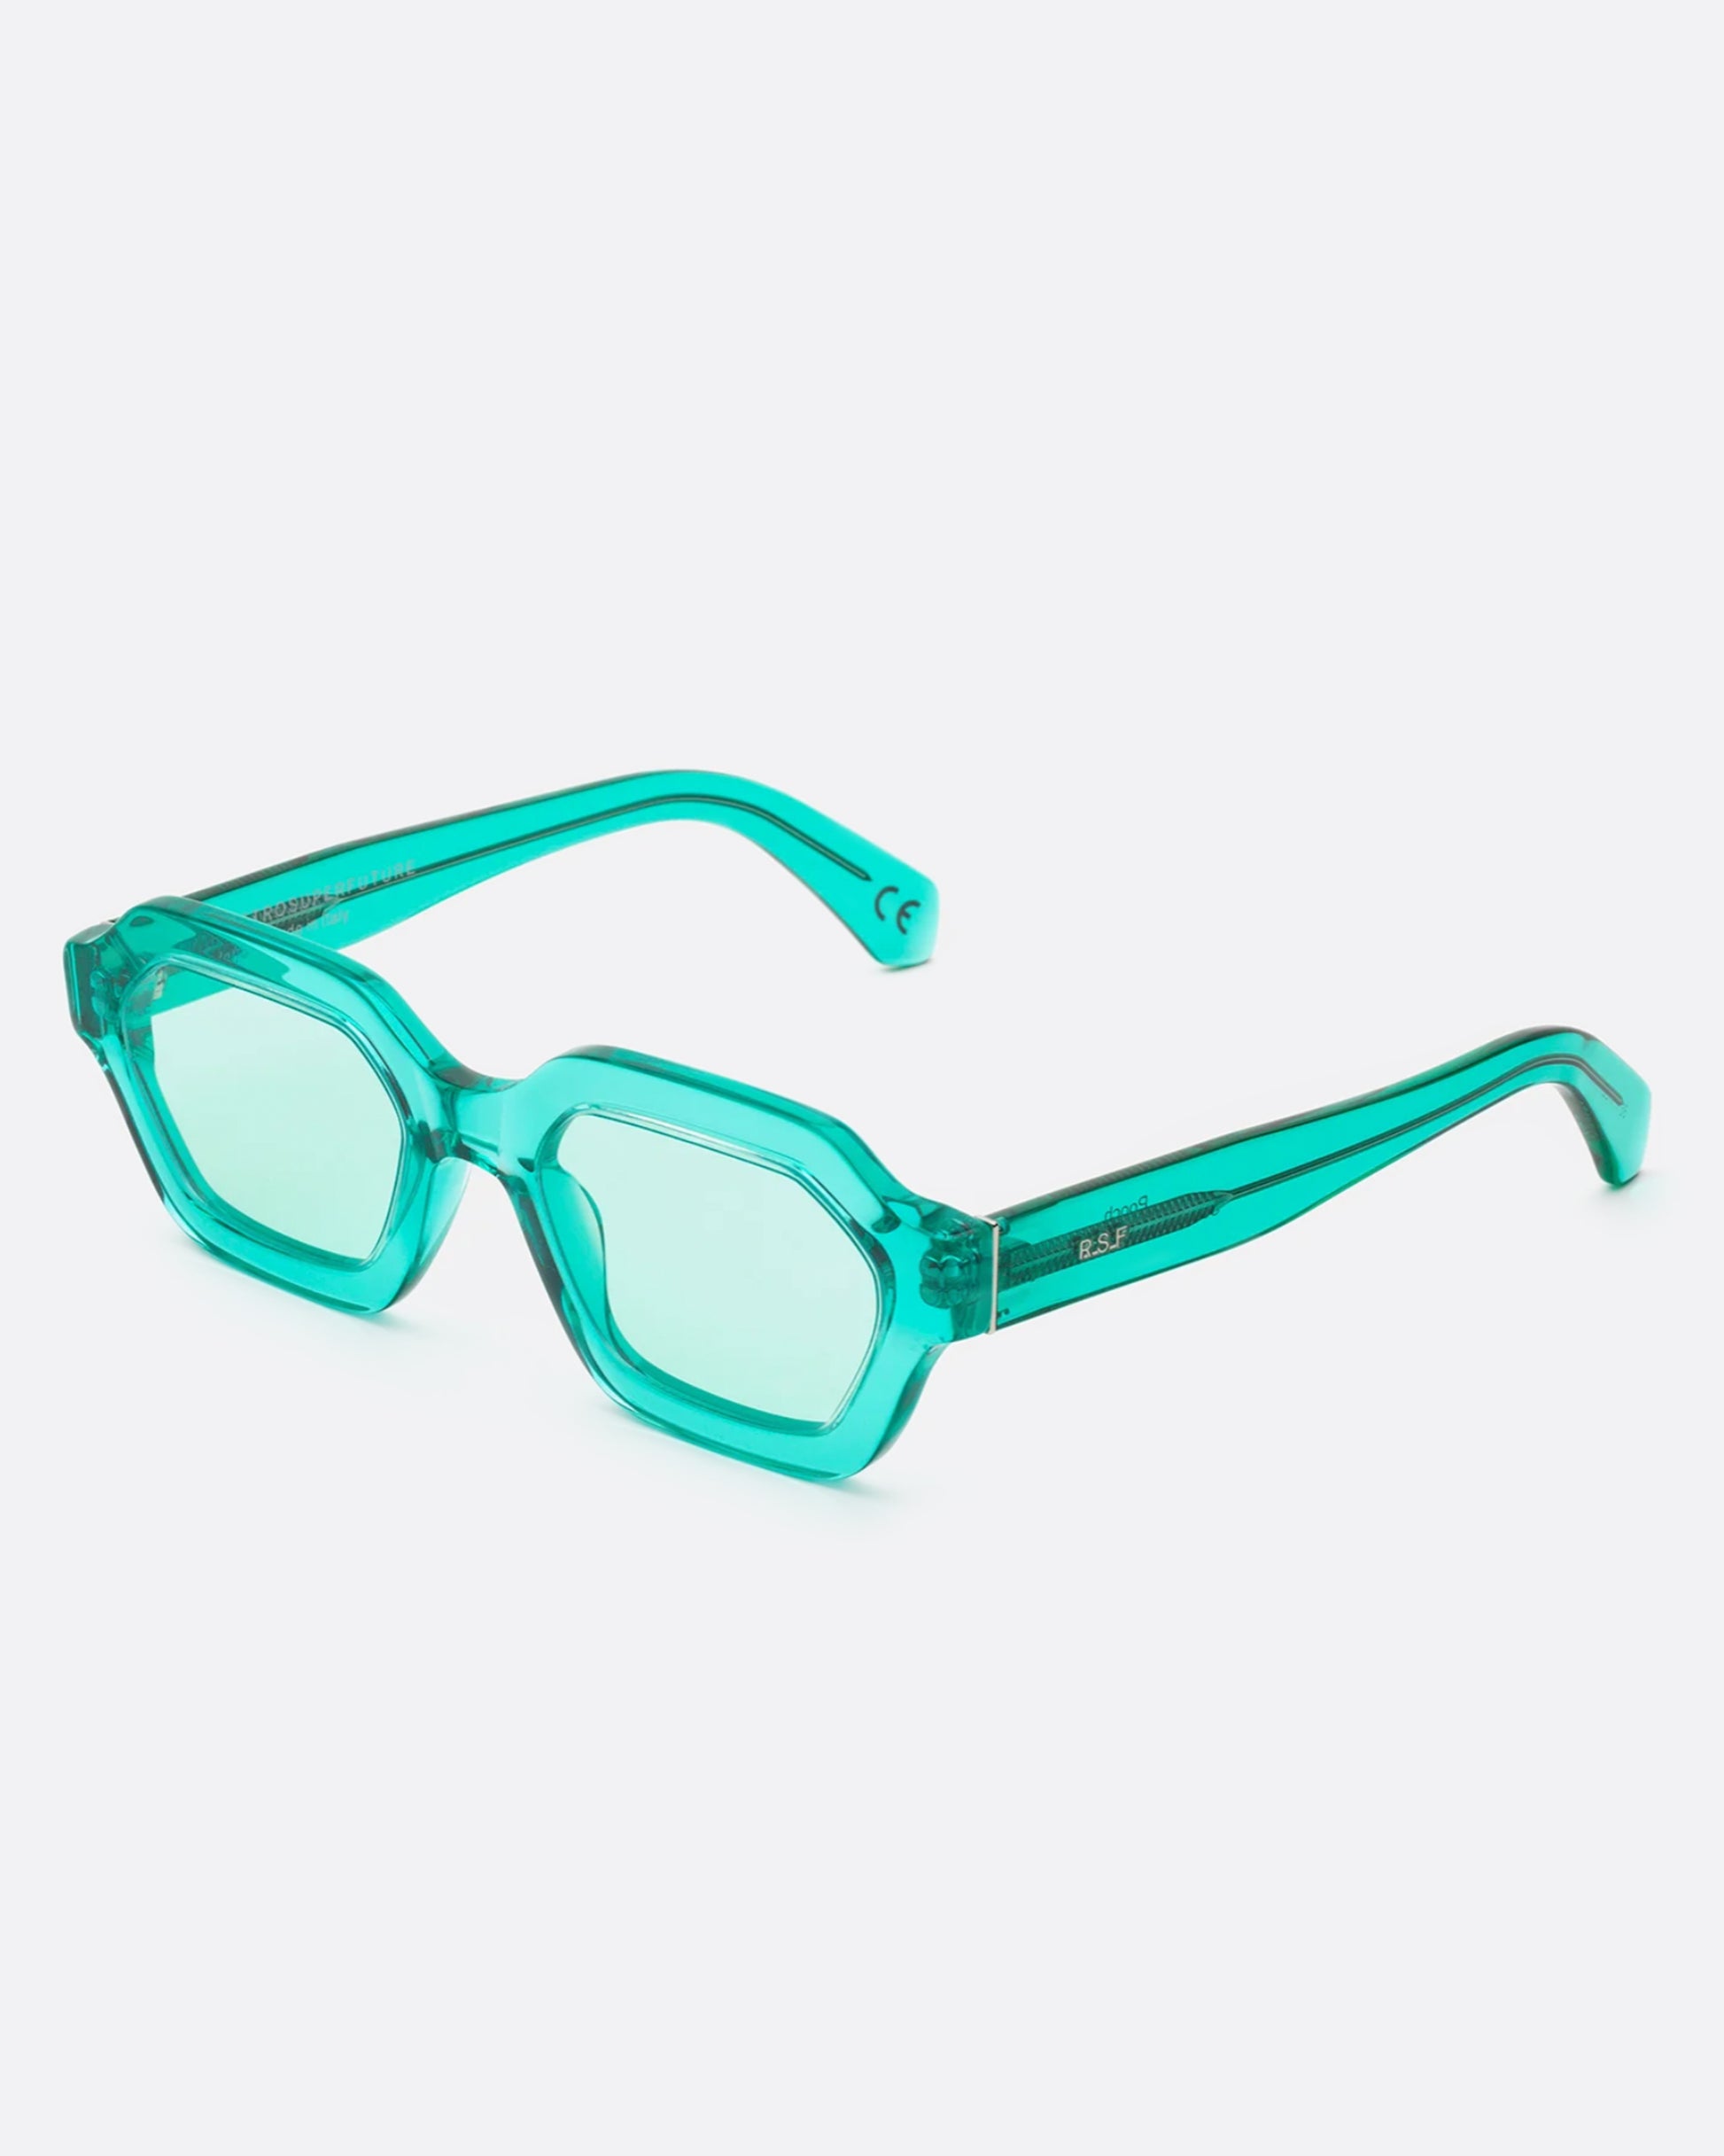 A pair monochromatic, turquoise glasses with transparent, geometric frames.